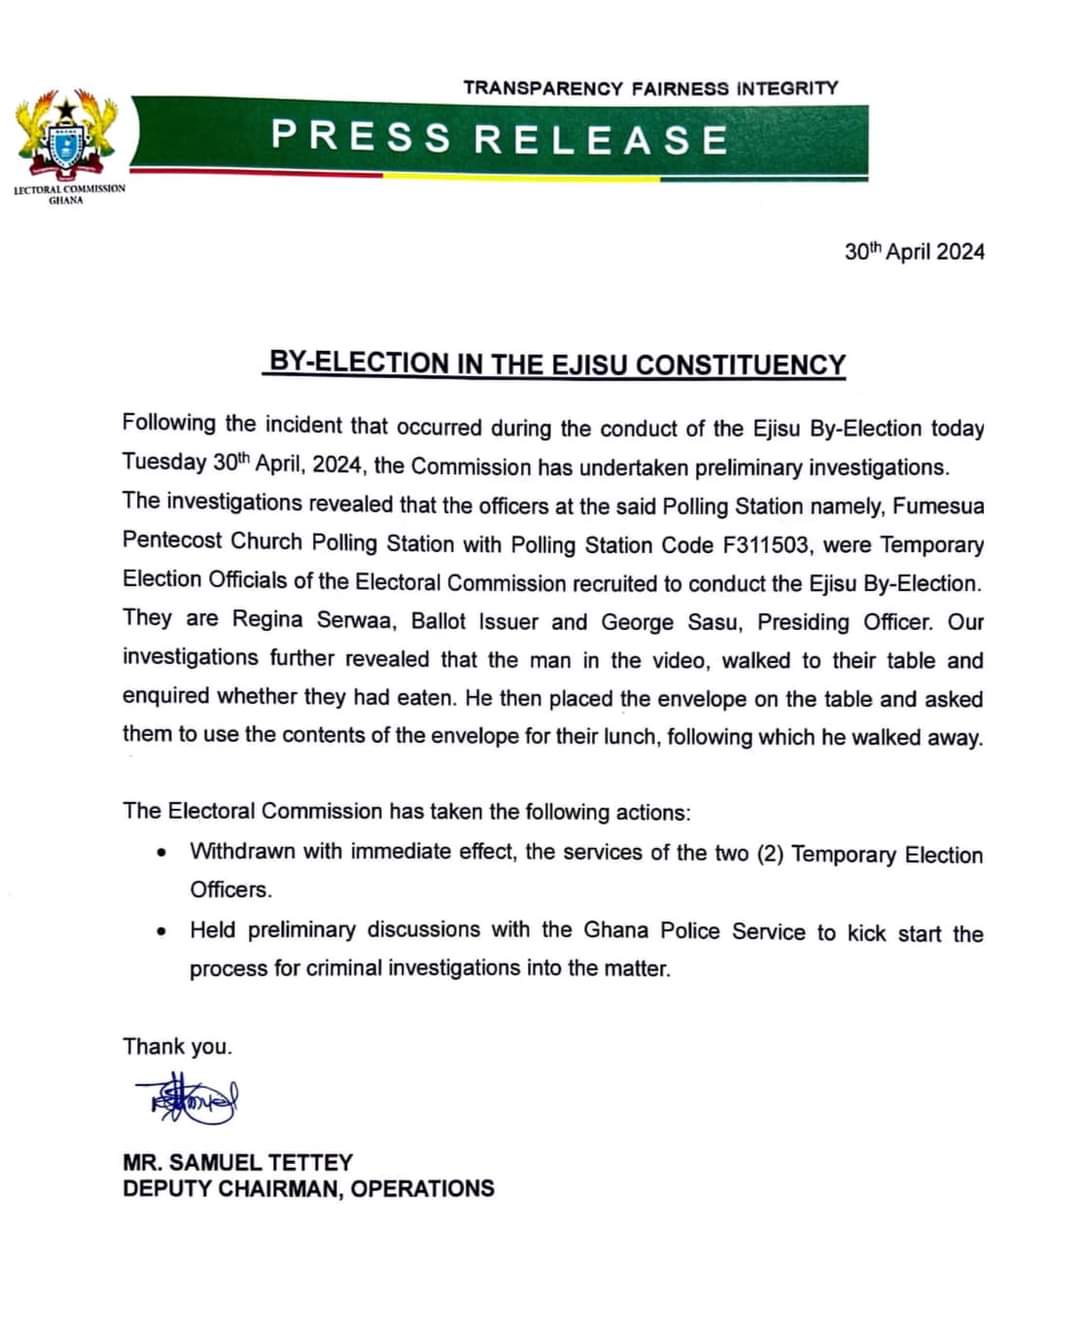 Ejisu by-election: EC refers alleged bribery incident to Police